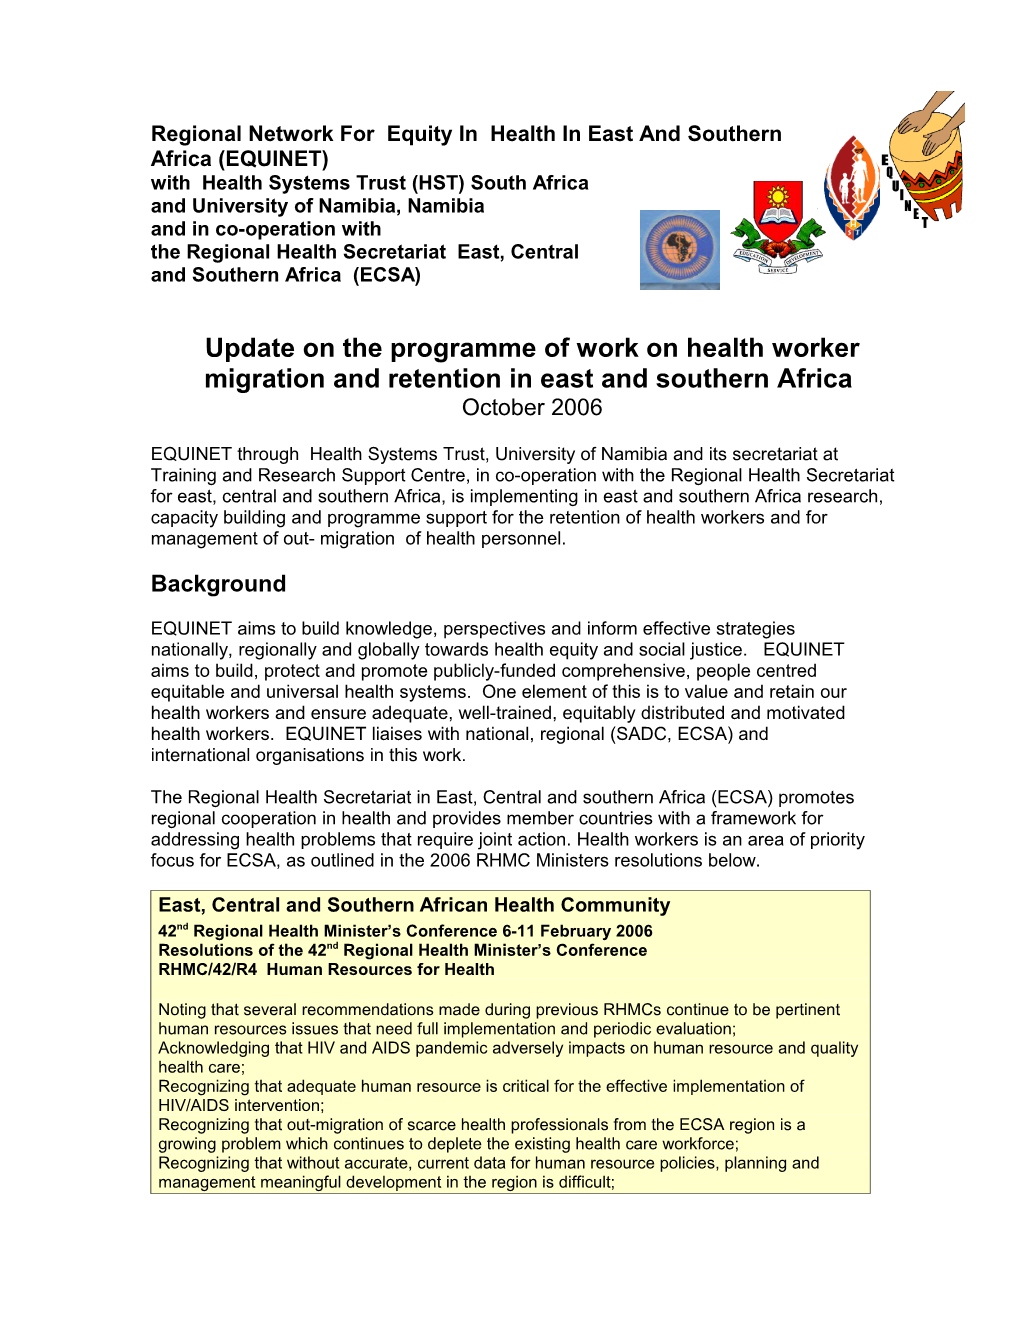 Regional Network for Equity in Health in East and Southern Africa (EQUINET)